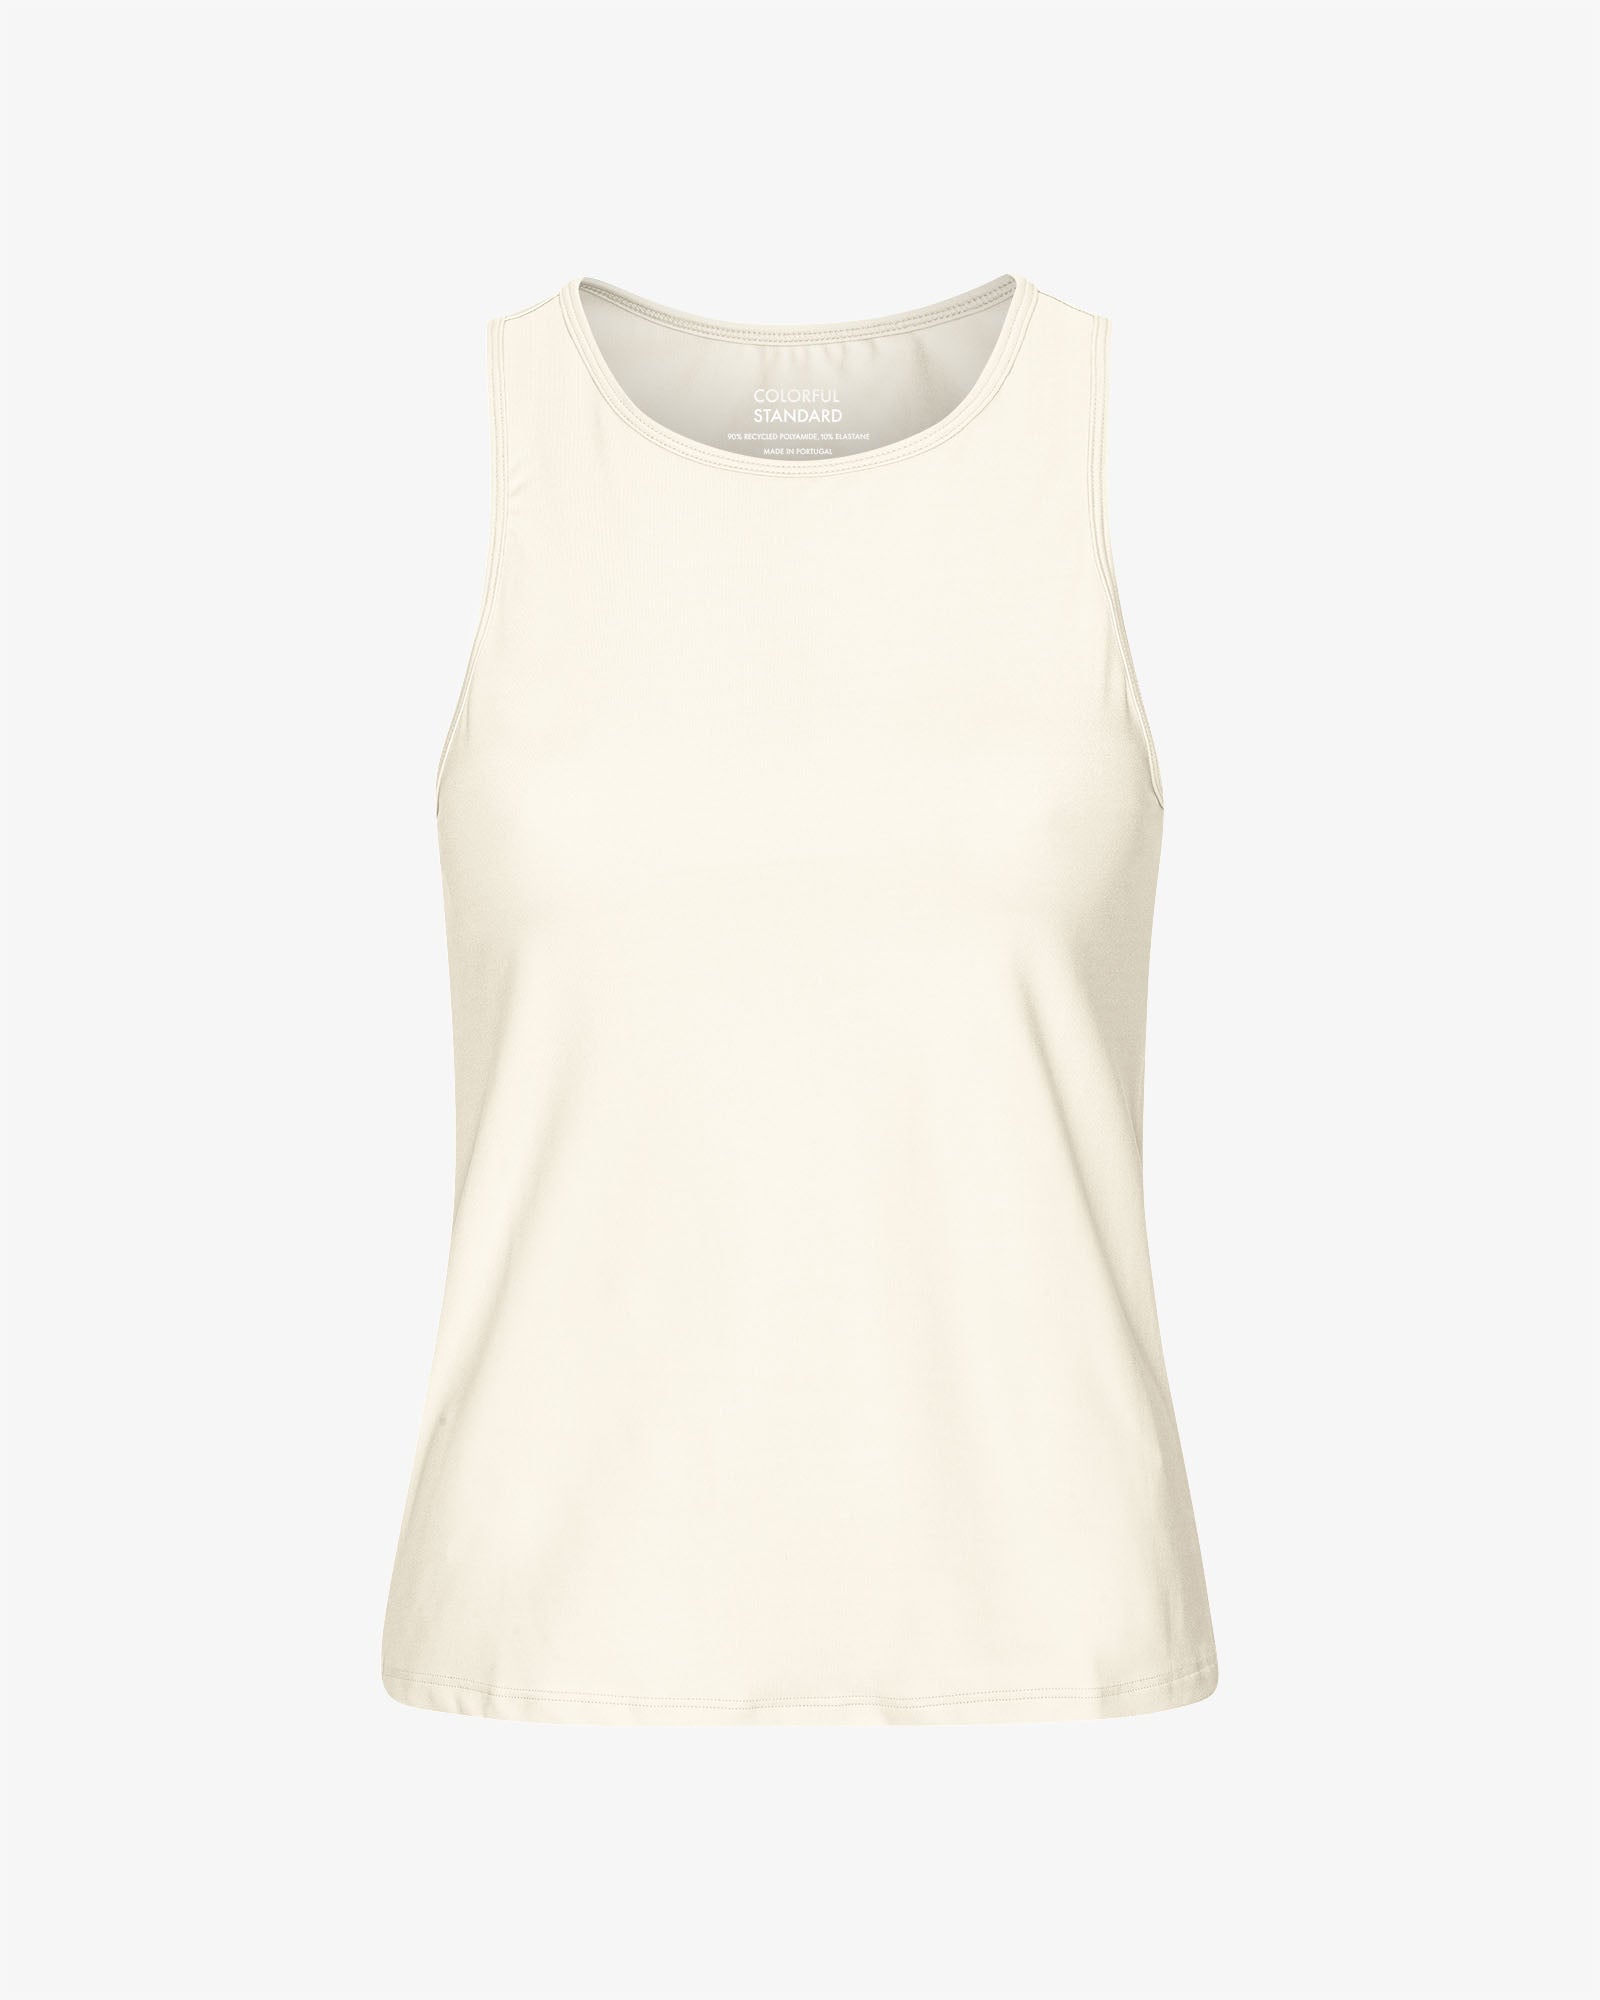 Colorful Standard Active Tank Top Ivory White Front